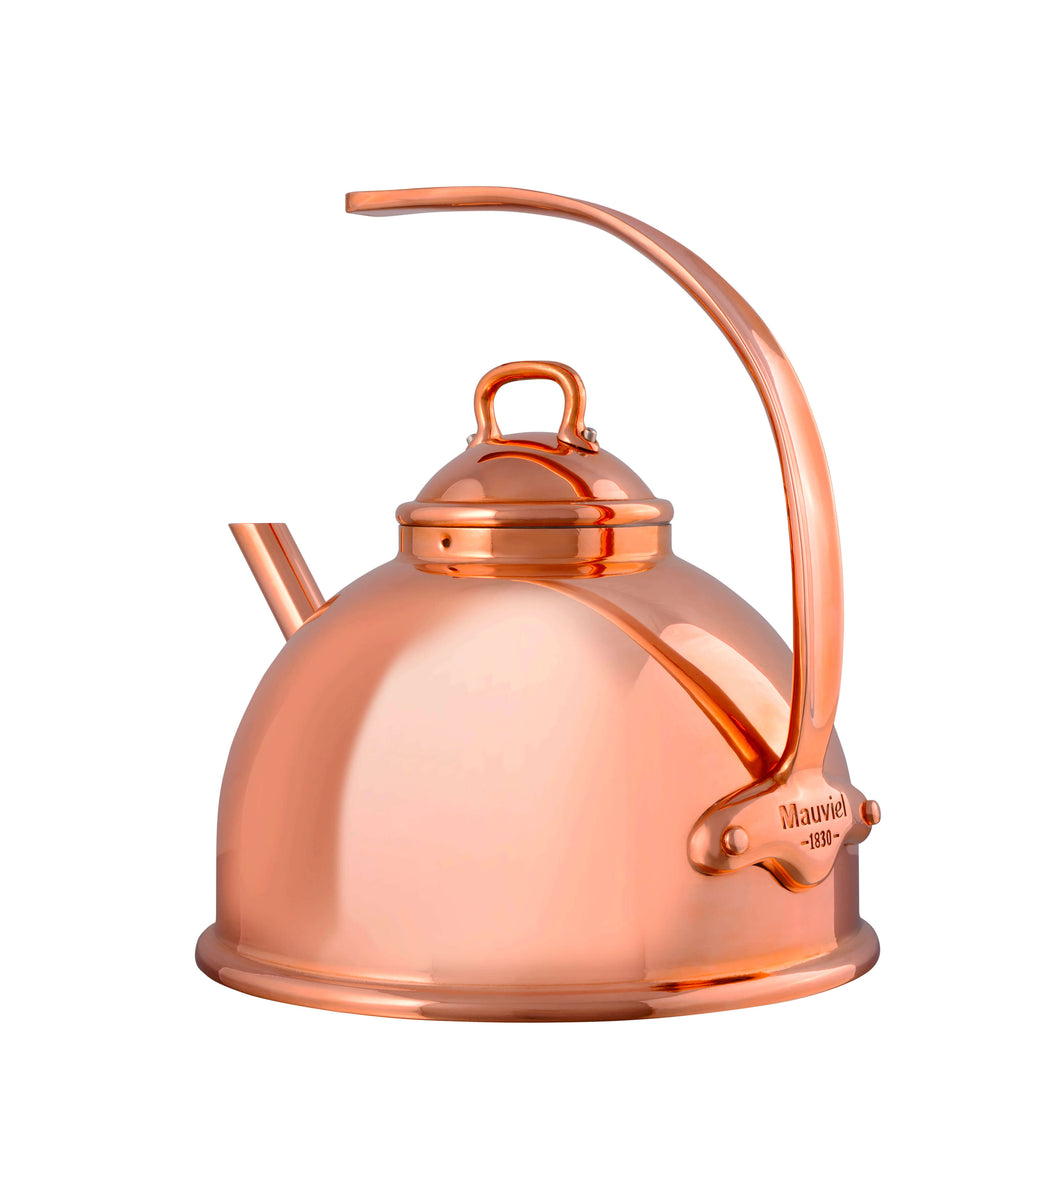 Mauviel Copper Kettle from the TABLE collection, Mauviel USA